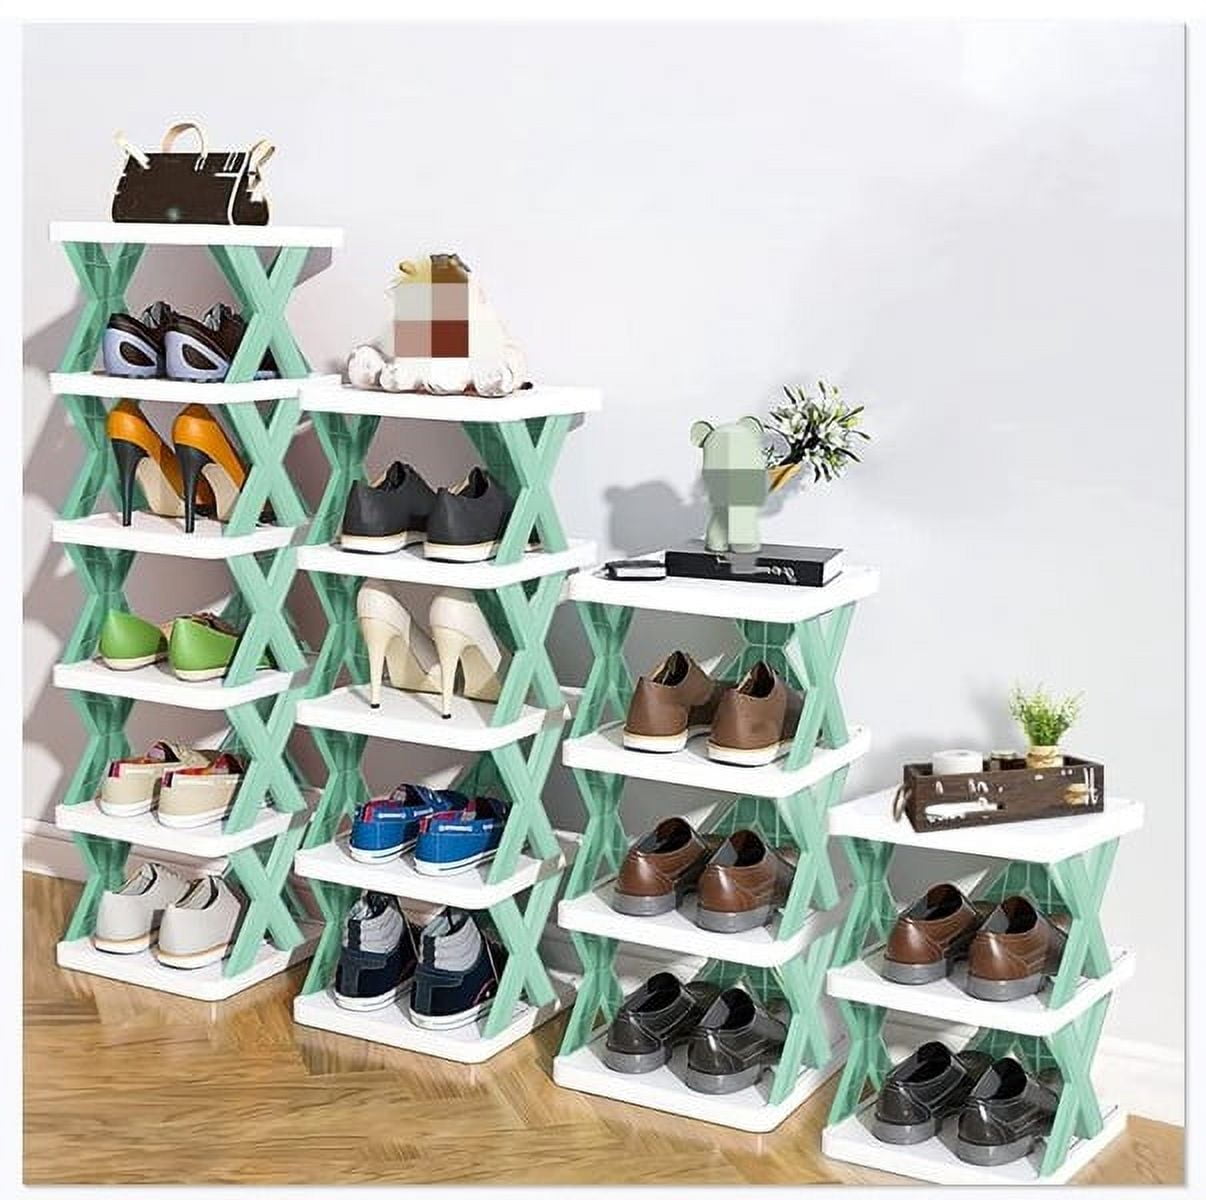 1pc Blue 9-tier Easy-to-assemble Shoe Rack With Adjustable Shelves For  Space-saving Shoe Storage And Small Objects Organization